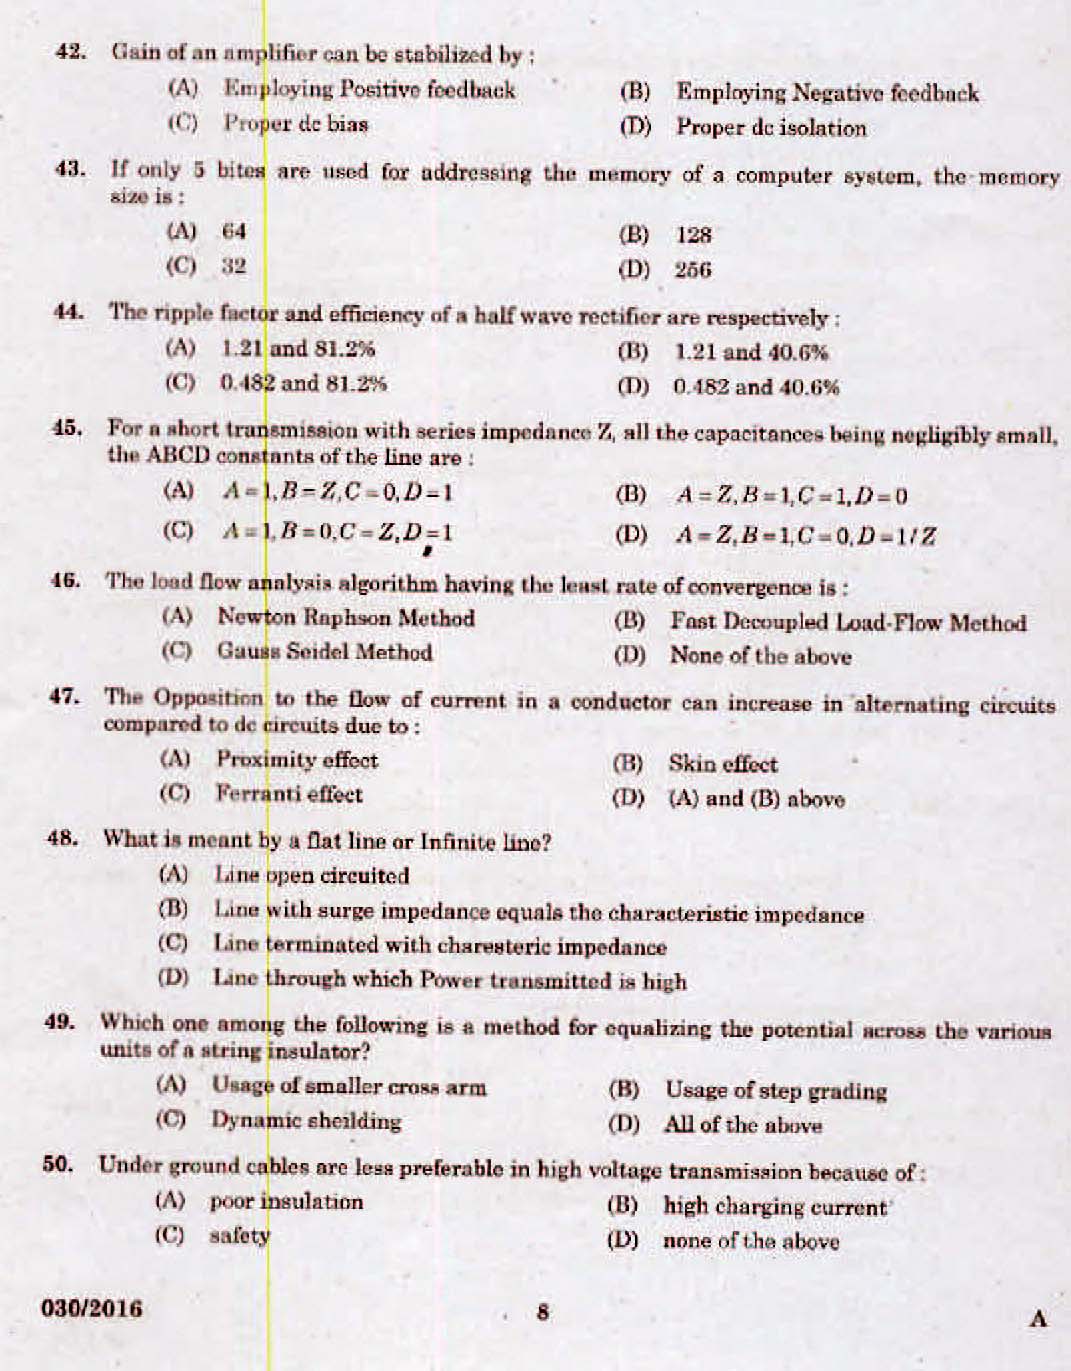 Kerala PSC Assistant Engineer Electrical Exam 2016 Question Paper Code 0302016 6